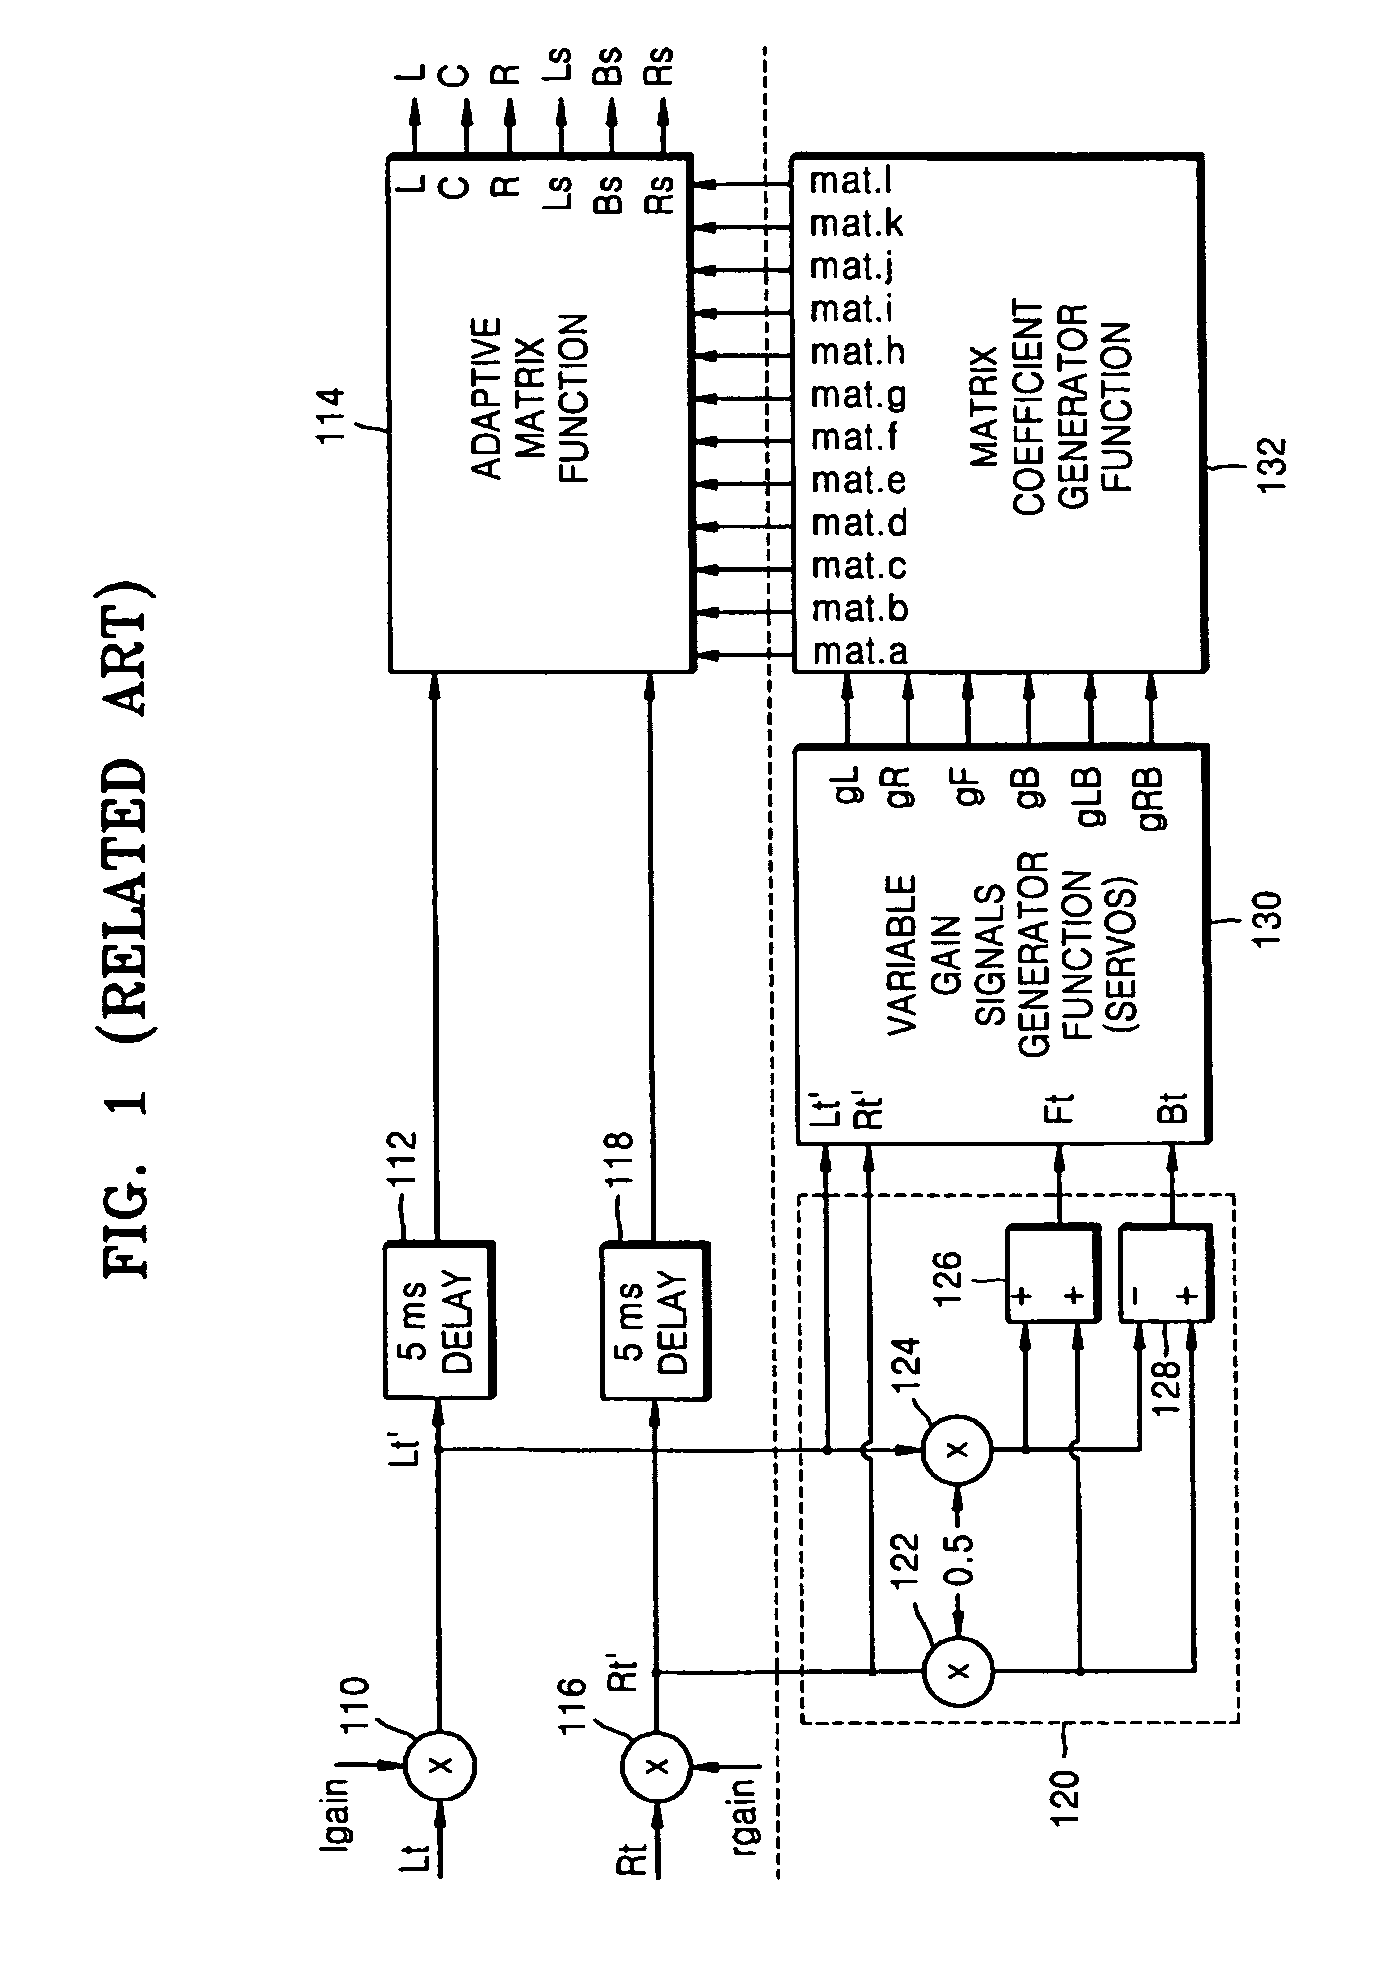 Method and apparatus to provide active audio matrix decoding based on the positions of speakers and a listener